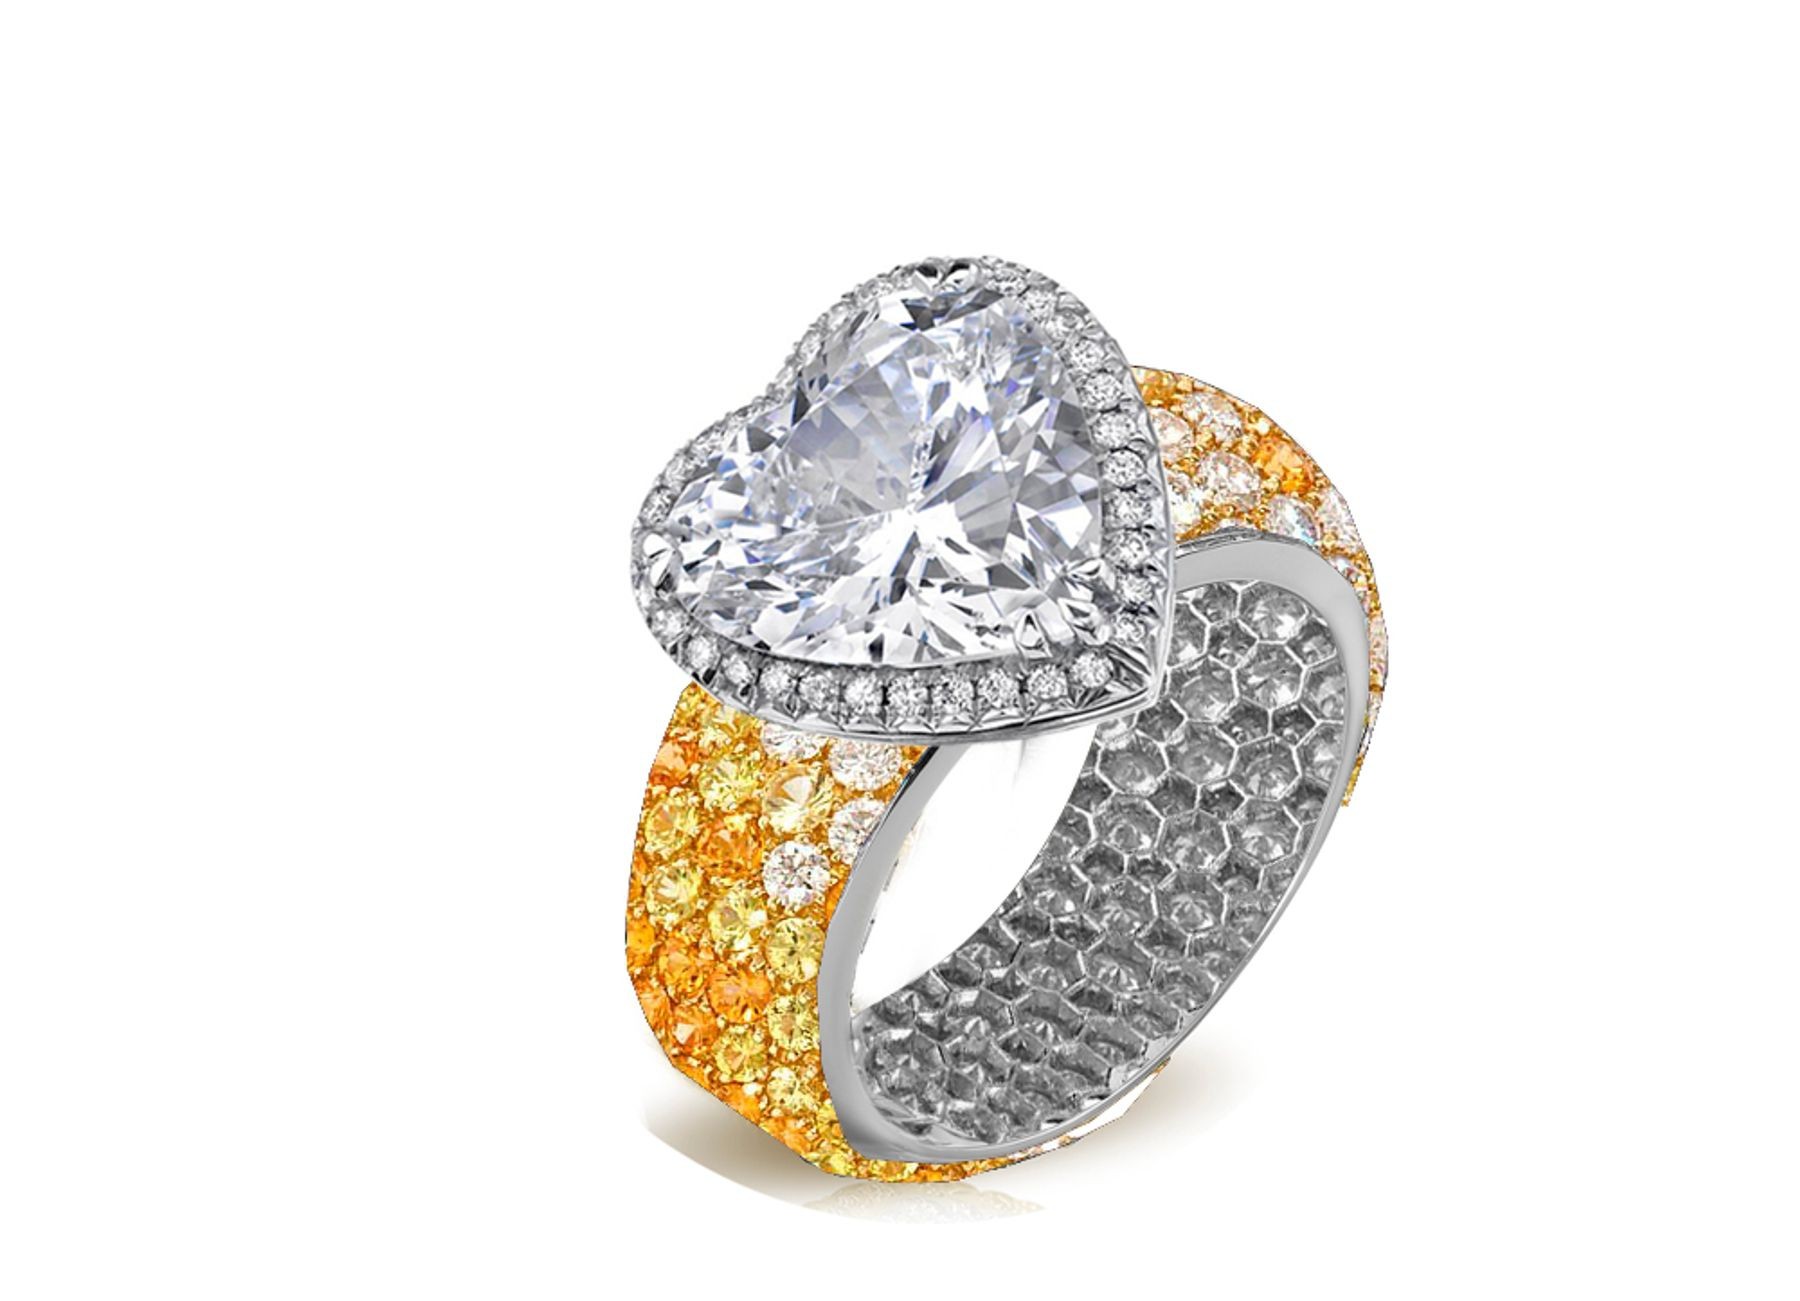 Halo Heart Diamond Ring with Diamonds & Yellow Sapphires in Gold or Platinum